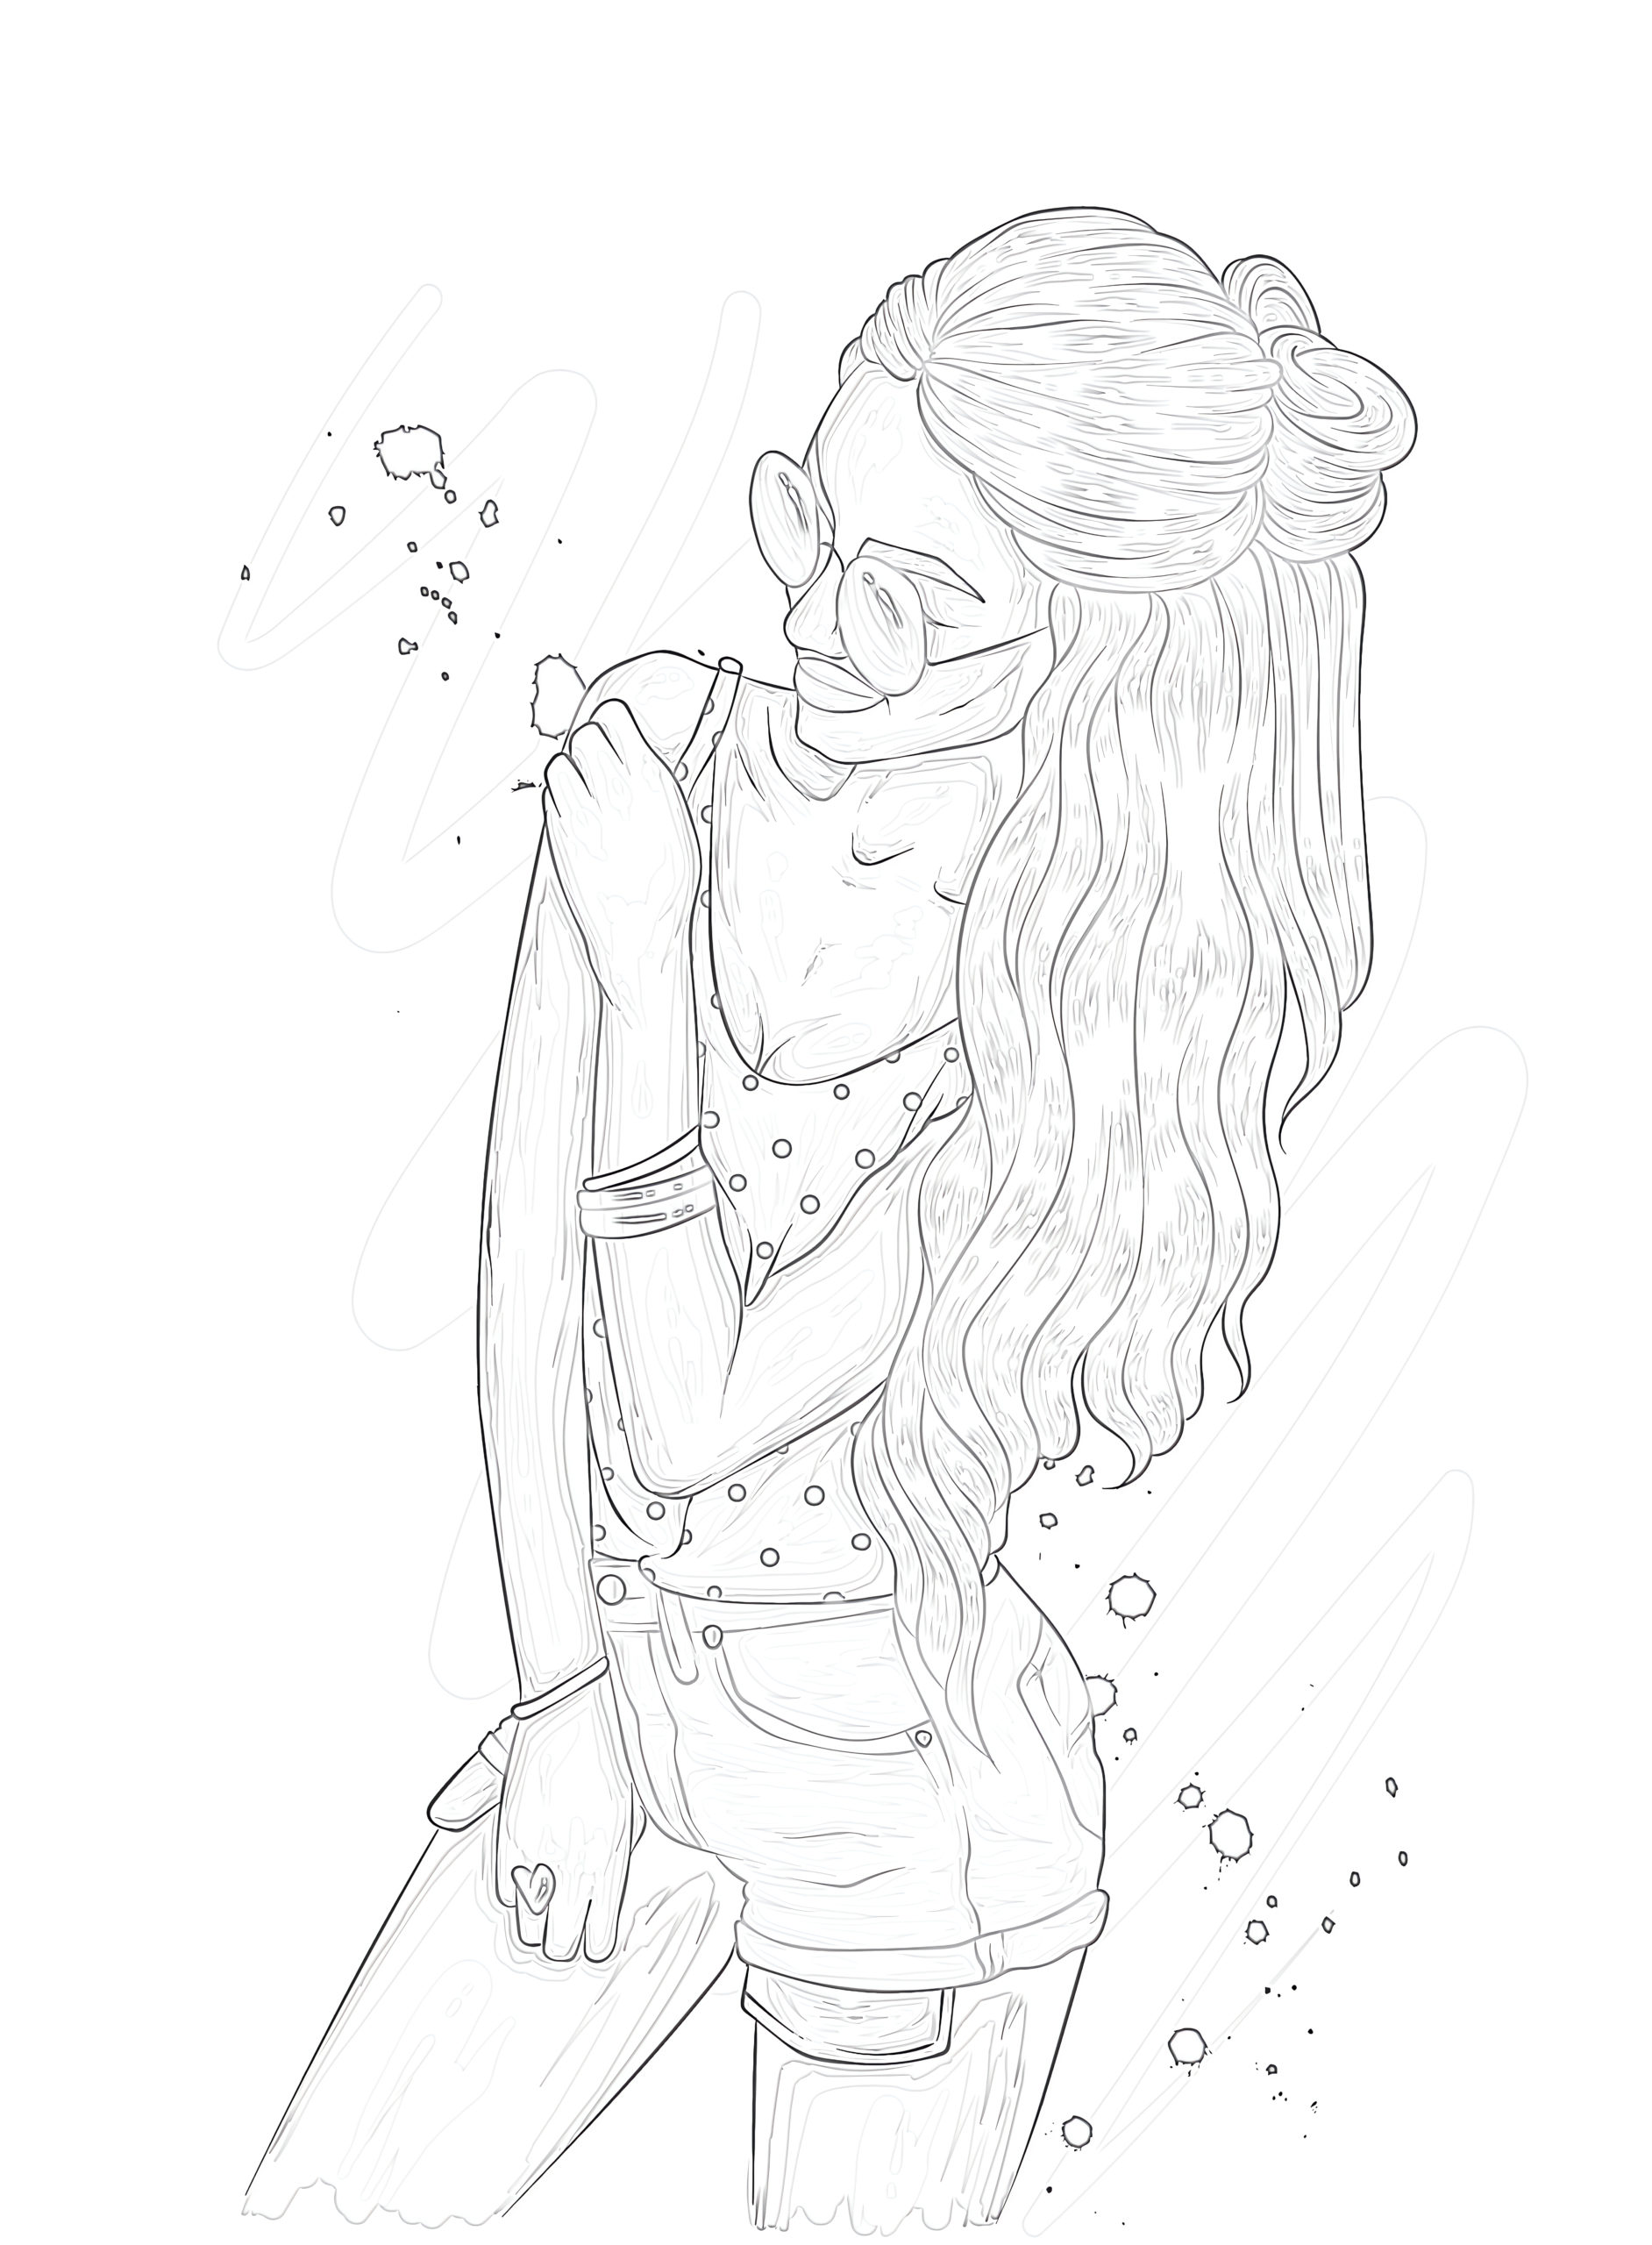 Girl with Glasses coloring page - Mimi Panda